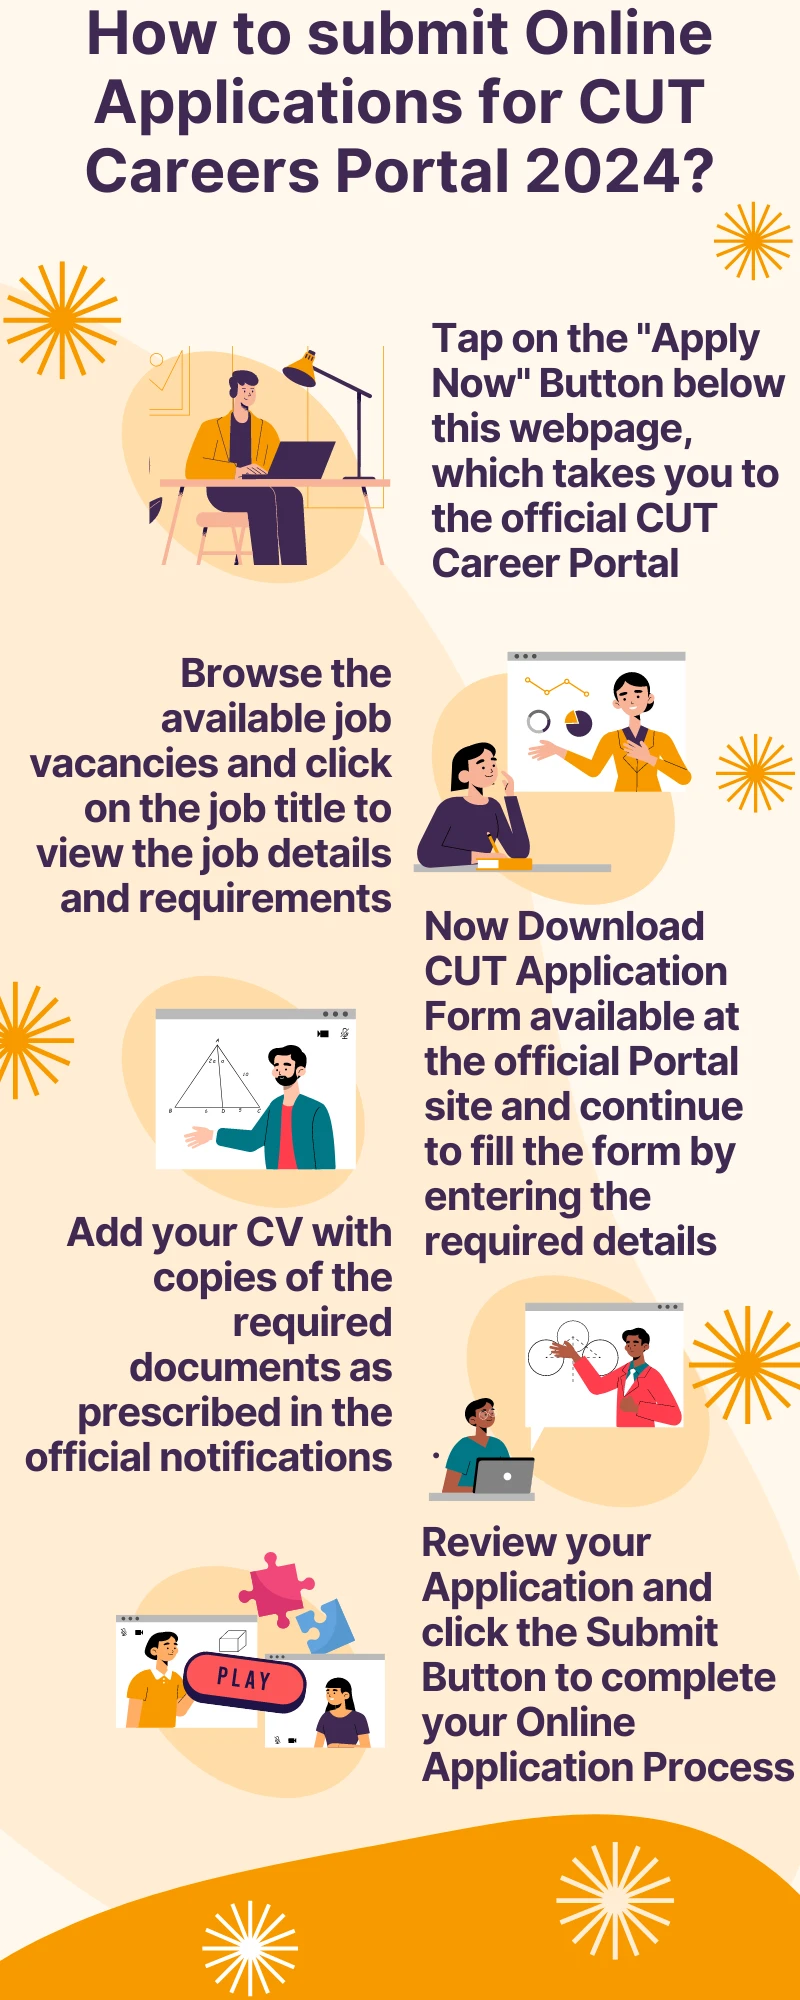 How to submit Online Applications for CUT Careers Portal 2024